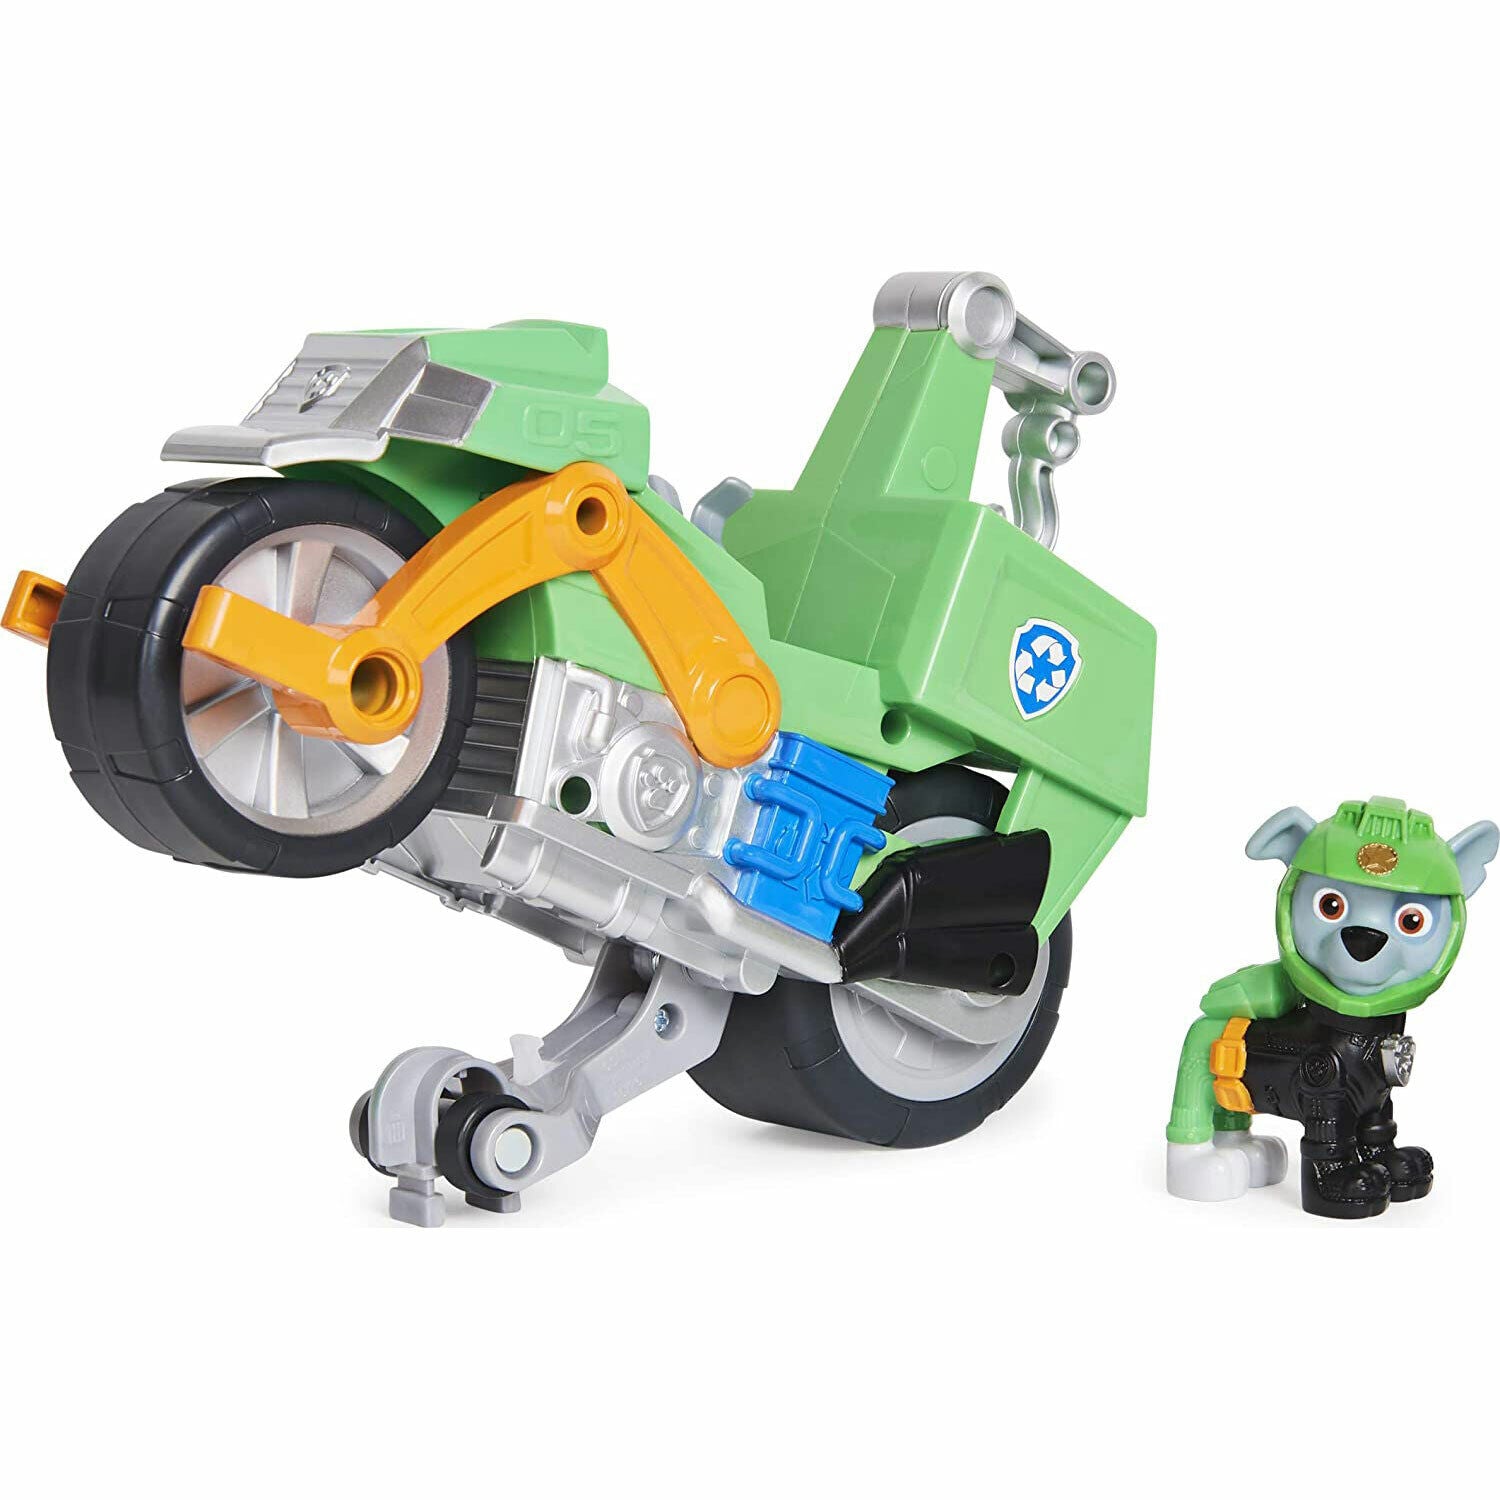 New PAW Patrol Moto Pups Rocky Deluxe Vehicle - Ready for Adventure!